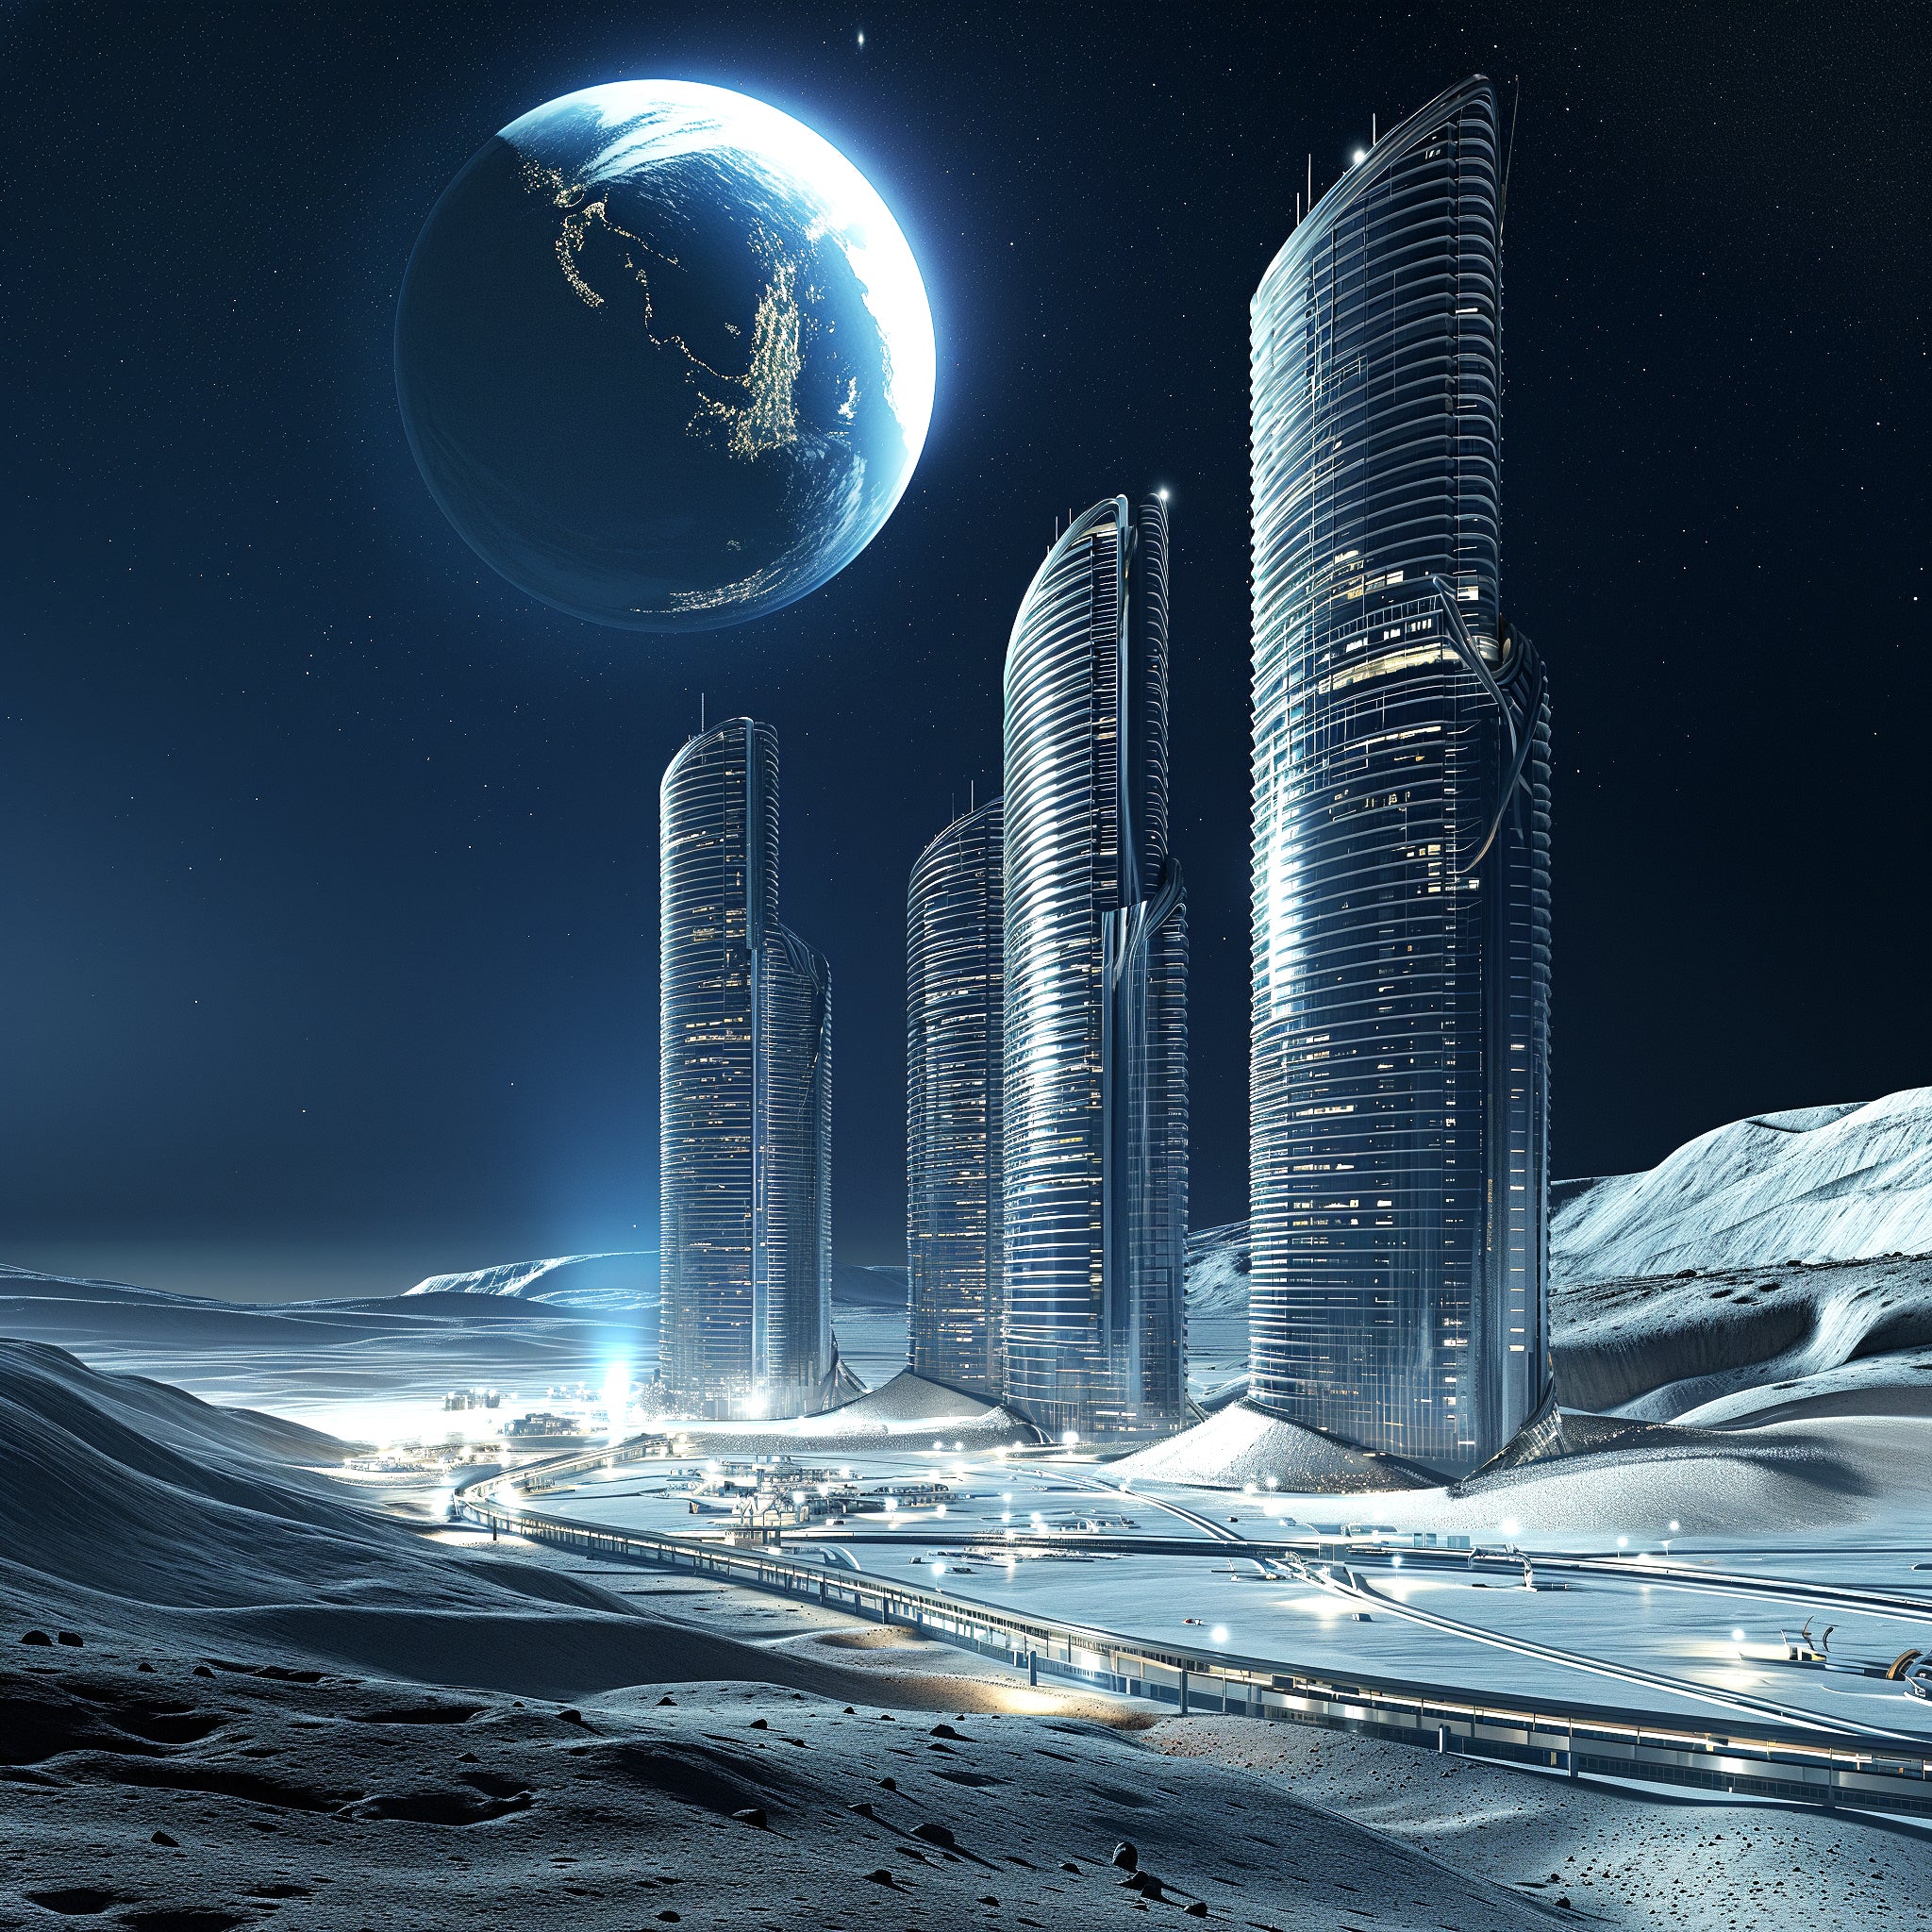 Earth 2.0: Can a Lunar Base Escape Our Earthly Baggage?